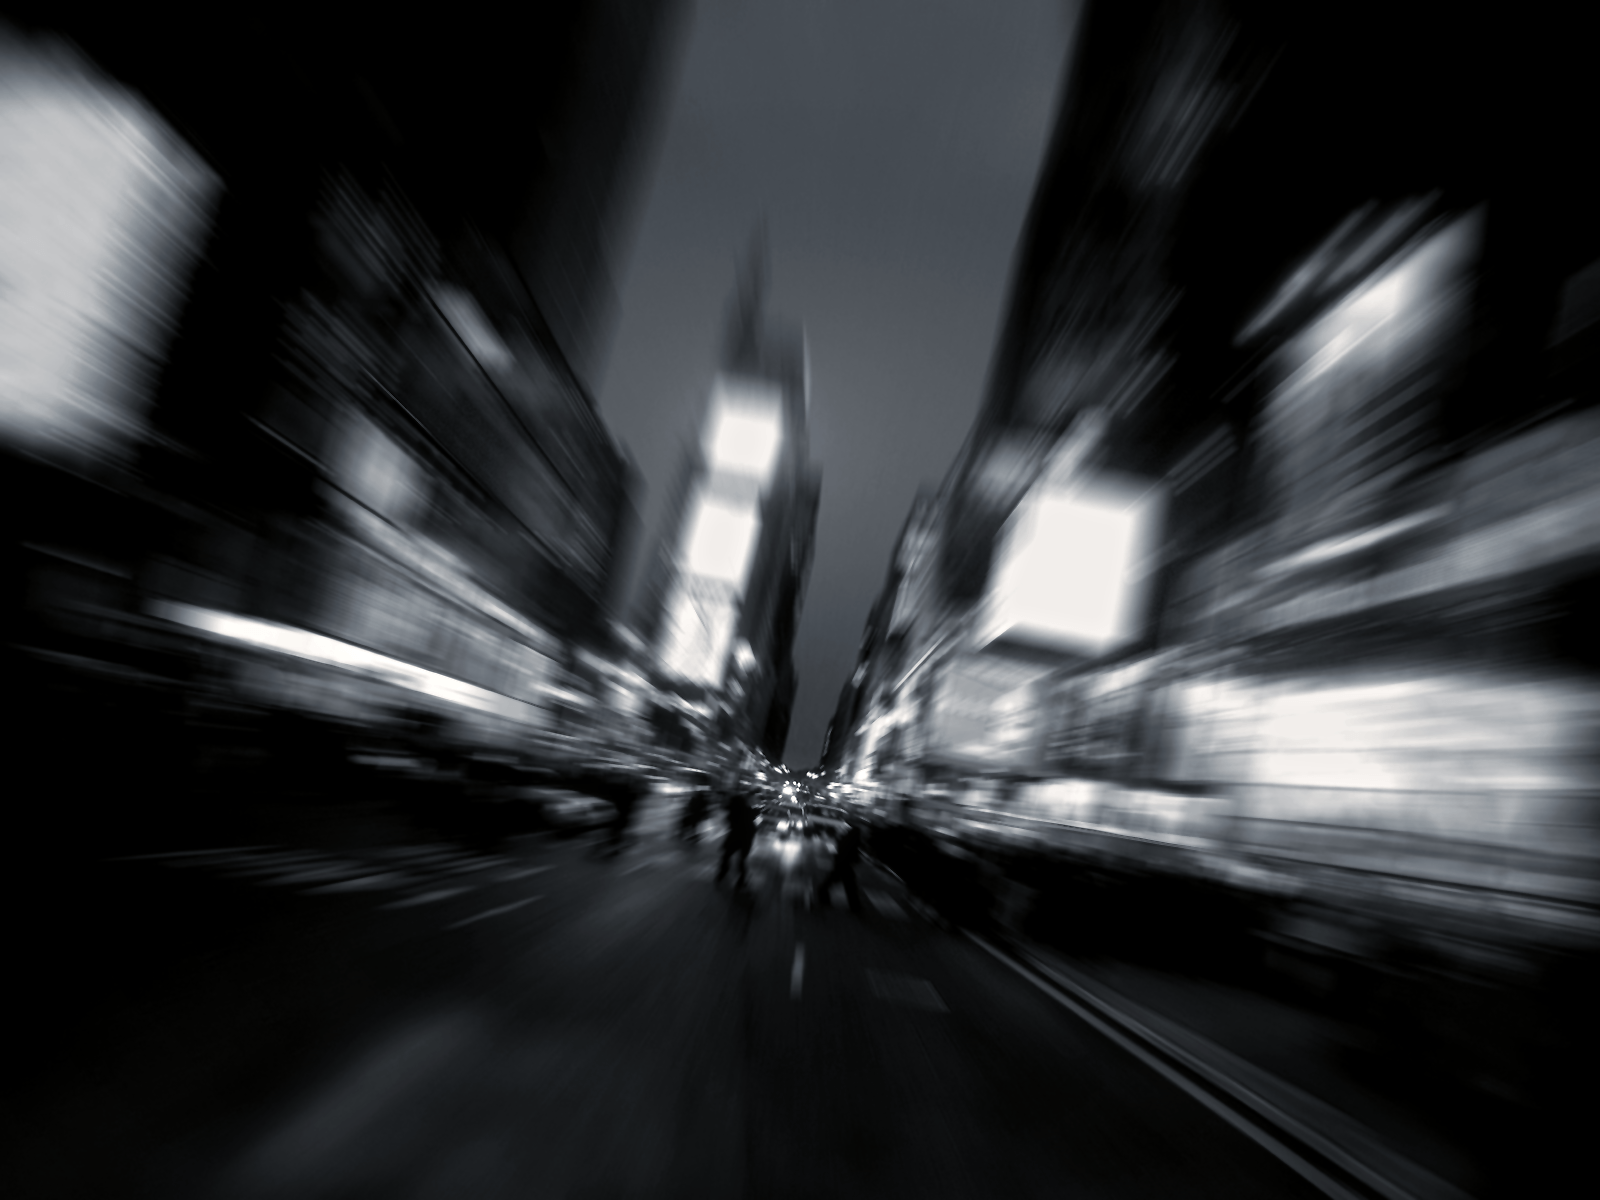 Black and White City Downtown wallpapers – If America Judged